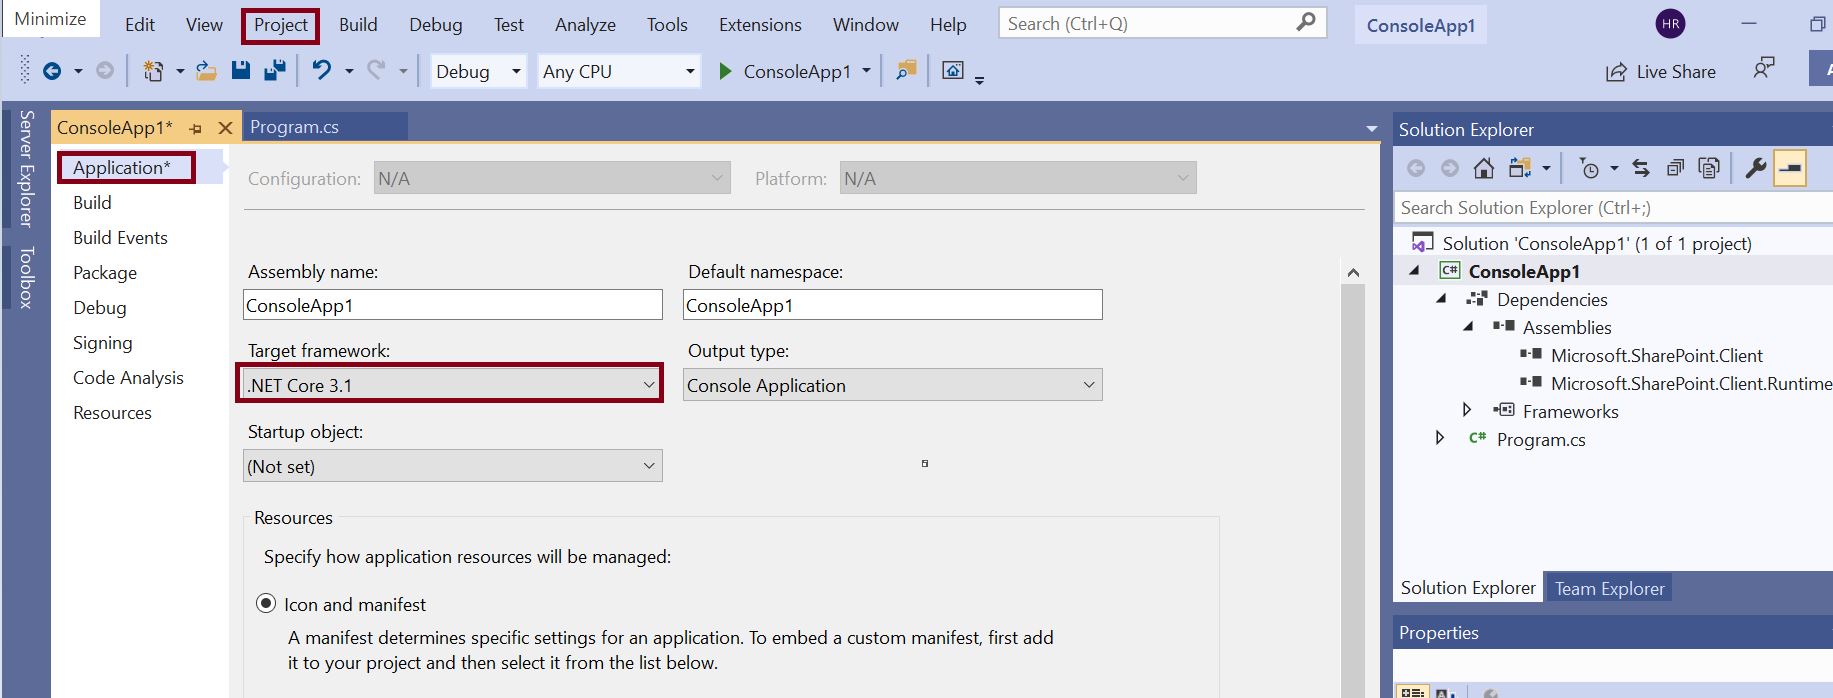 Authentication in SharePoint online - Change project target framework from C# console application